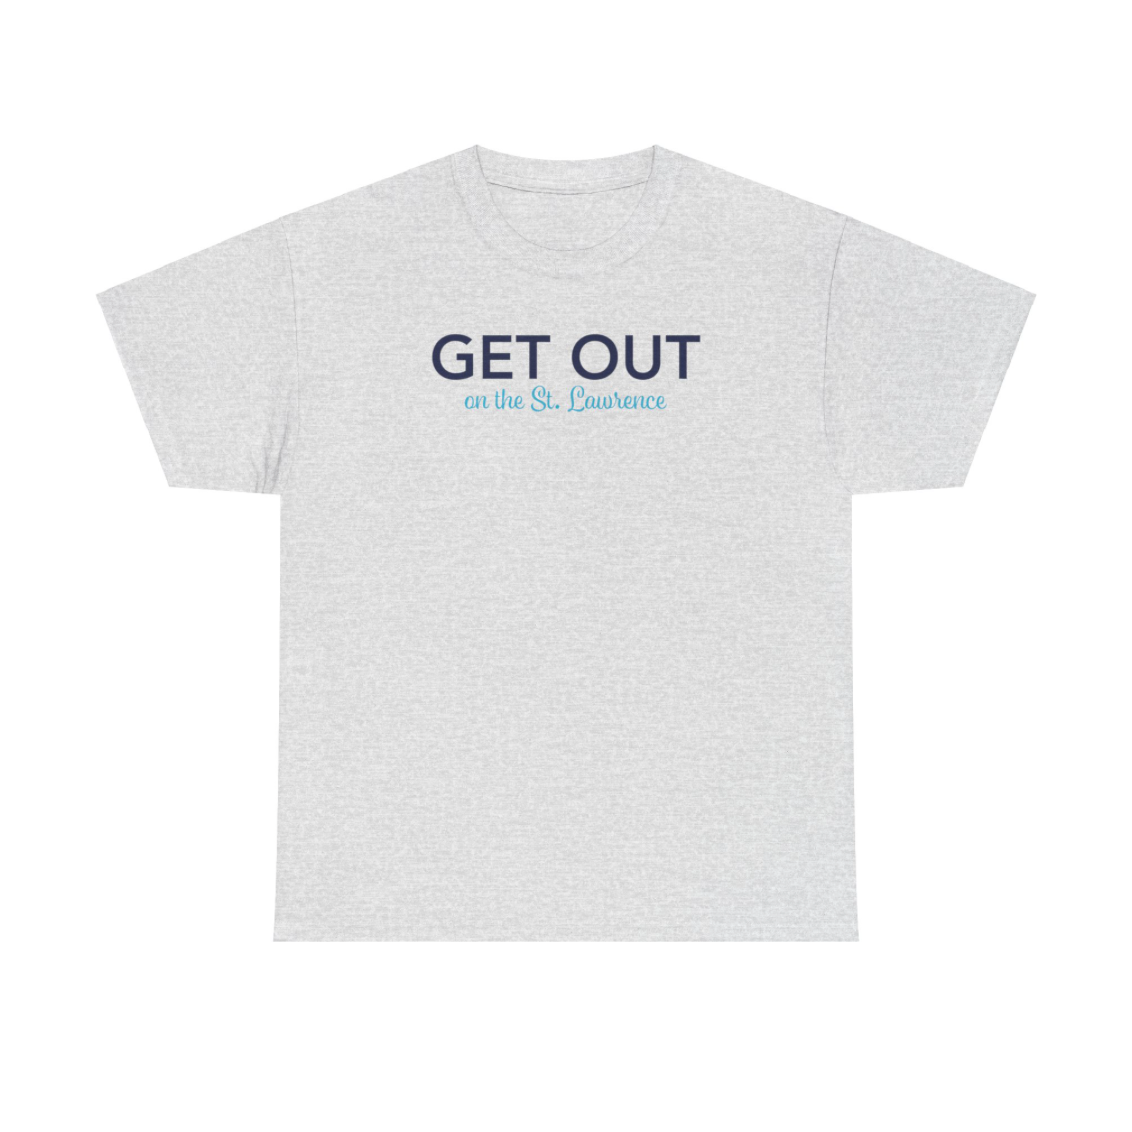 GET OUT on the St. Lawrence – Unisex Heavy Cotton Tee    U.S.